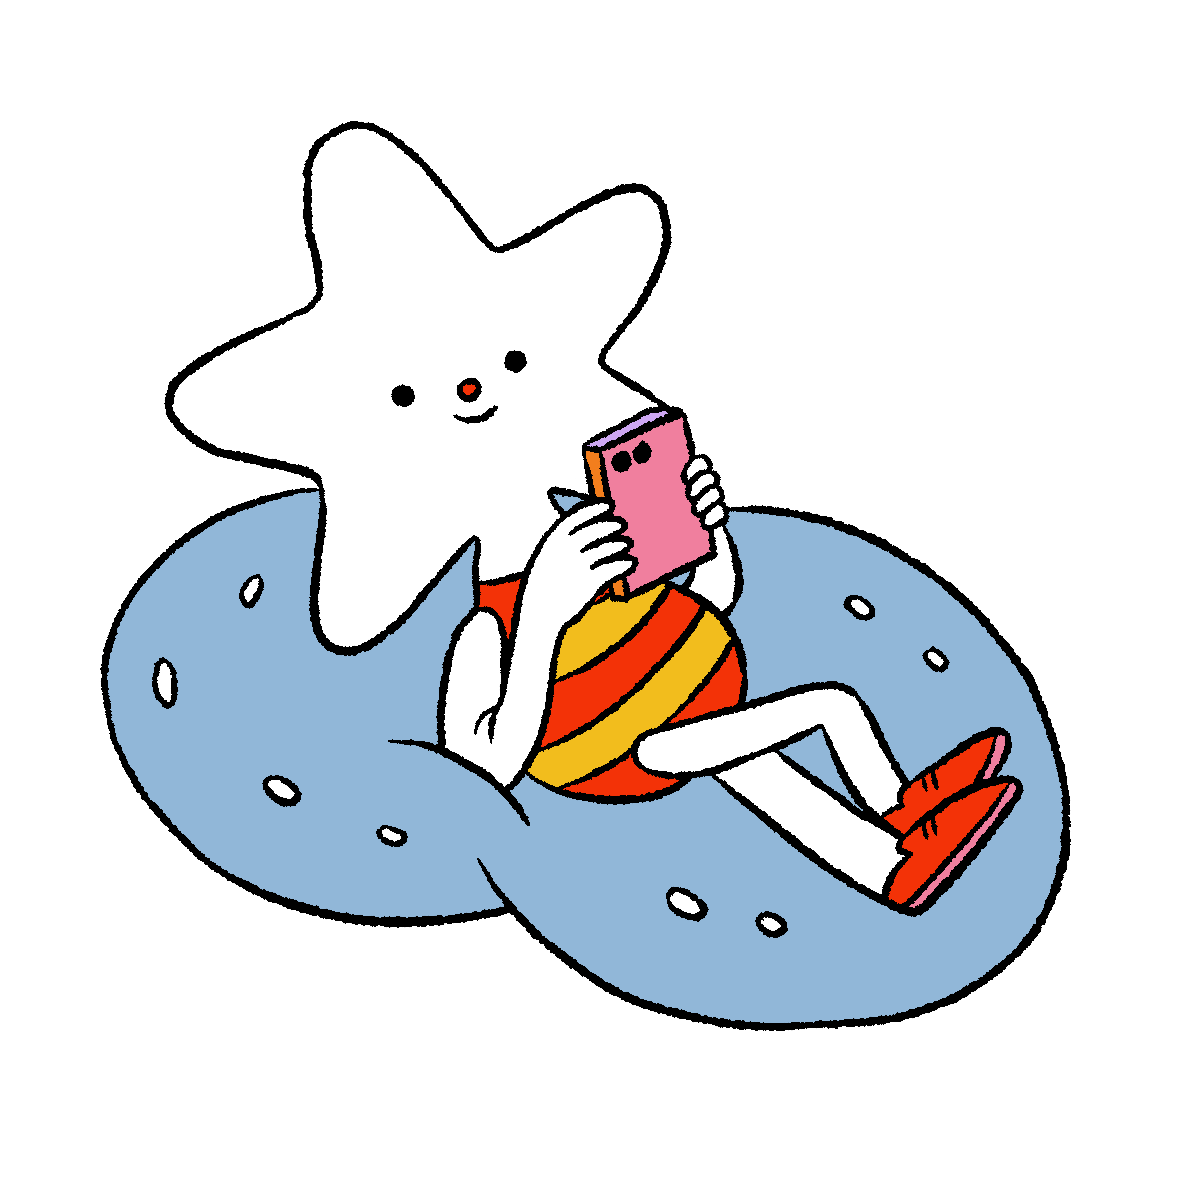 A star headed person lies on an inflatable raft, reading a book.